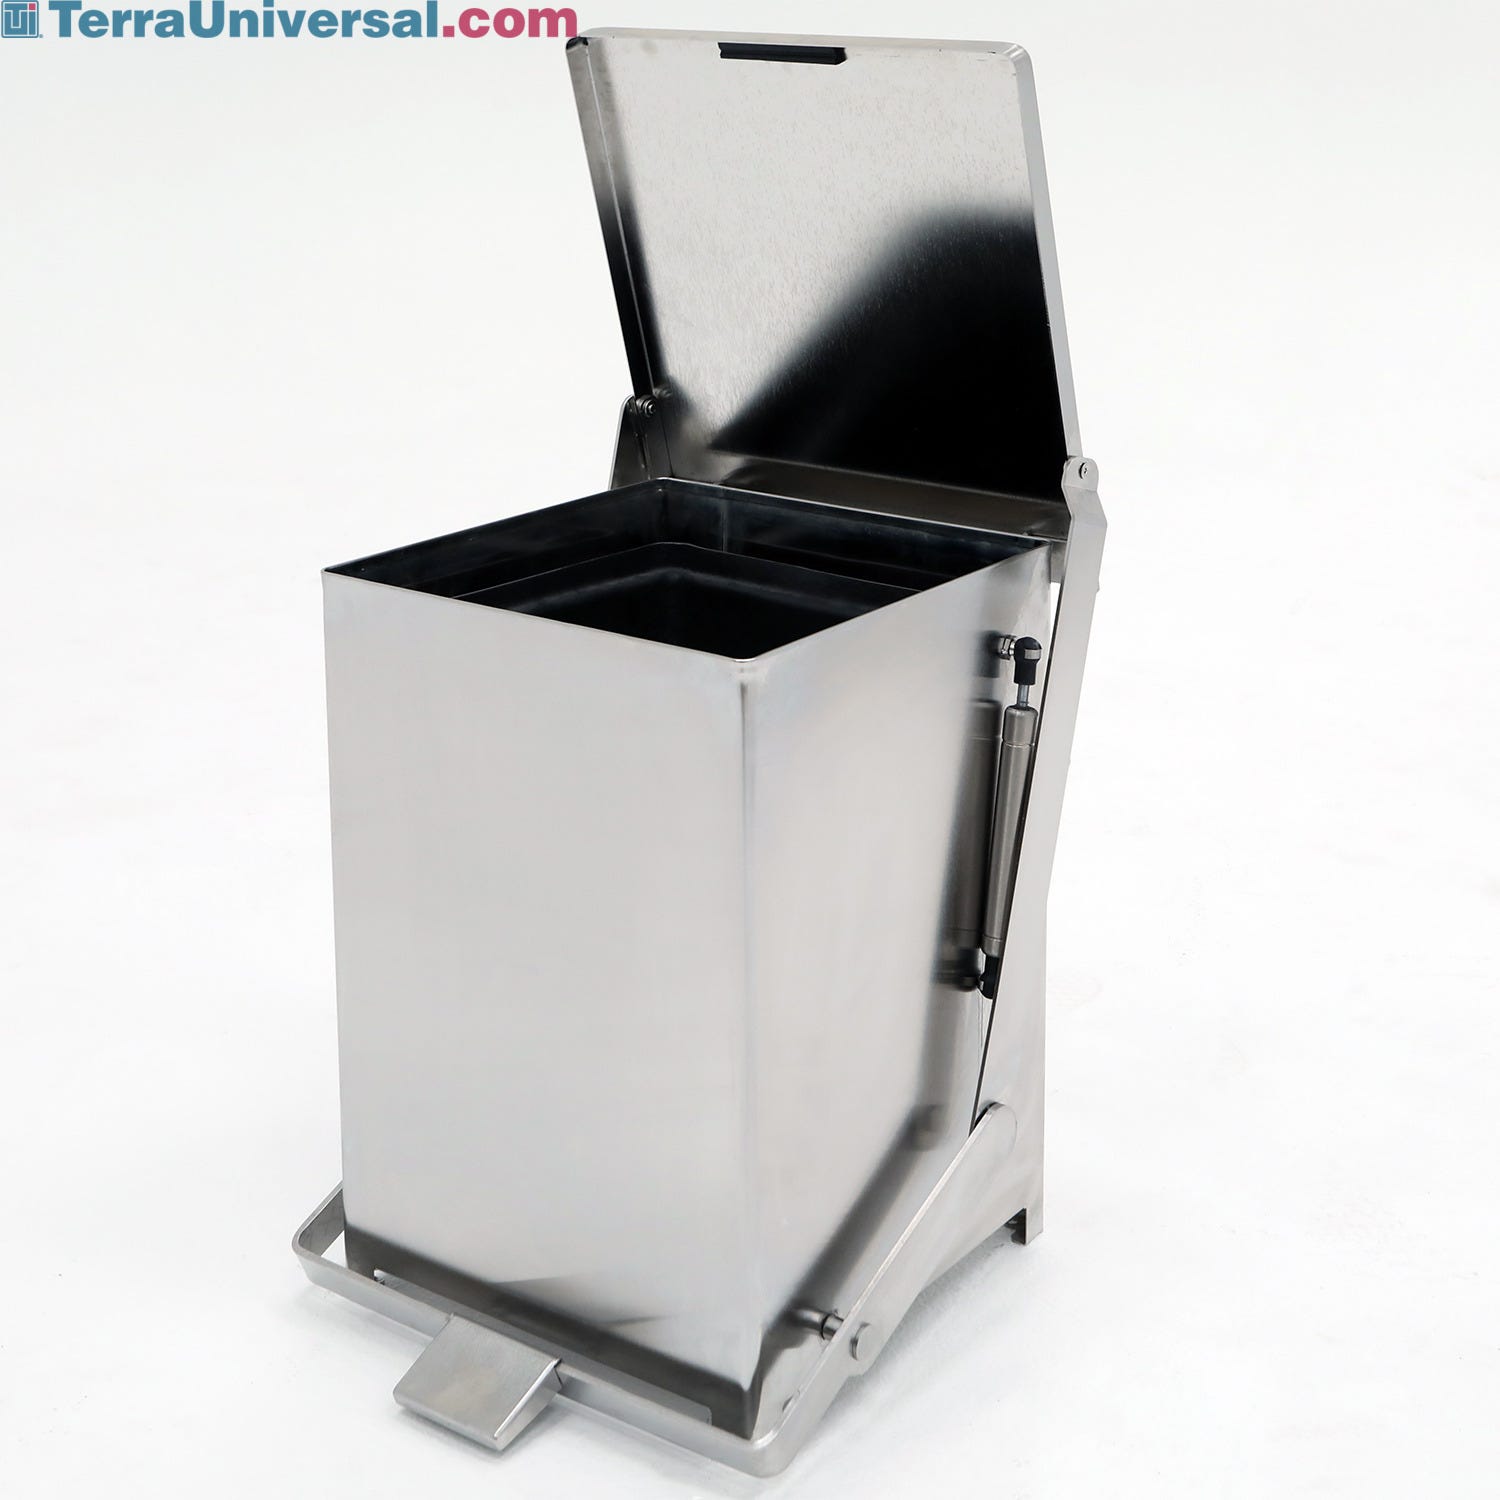 https://www.terrauniversal.com/media/asset-library/cache/original/watermark_c/1/E/l/Electropolished-stainless-steel-hands-free-rectangular-trash-can-r2.jpg